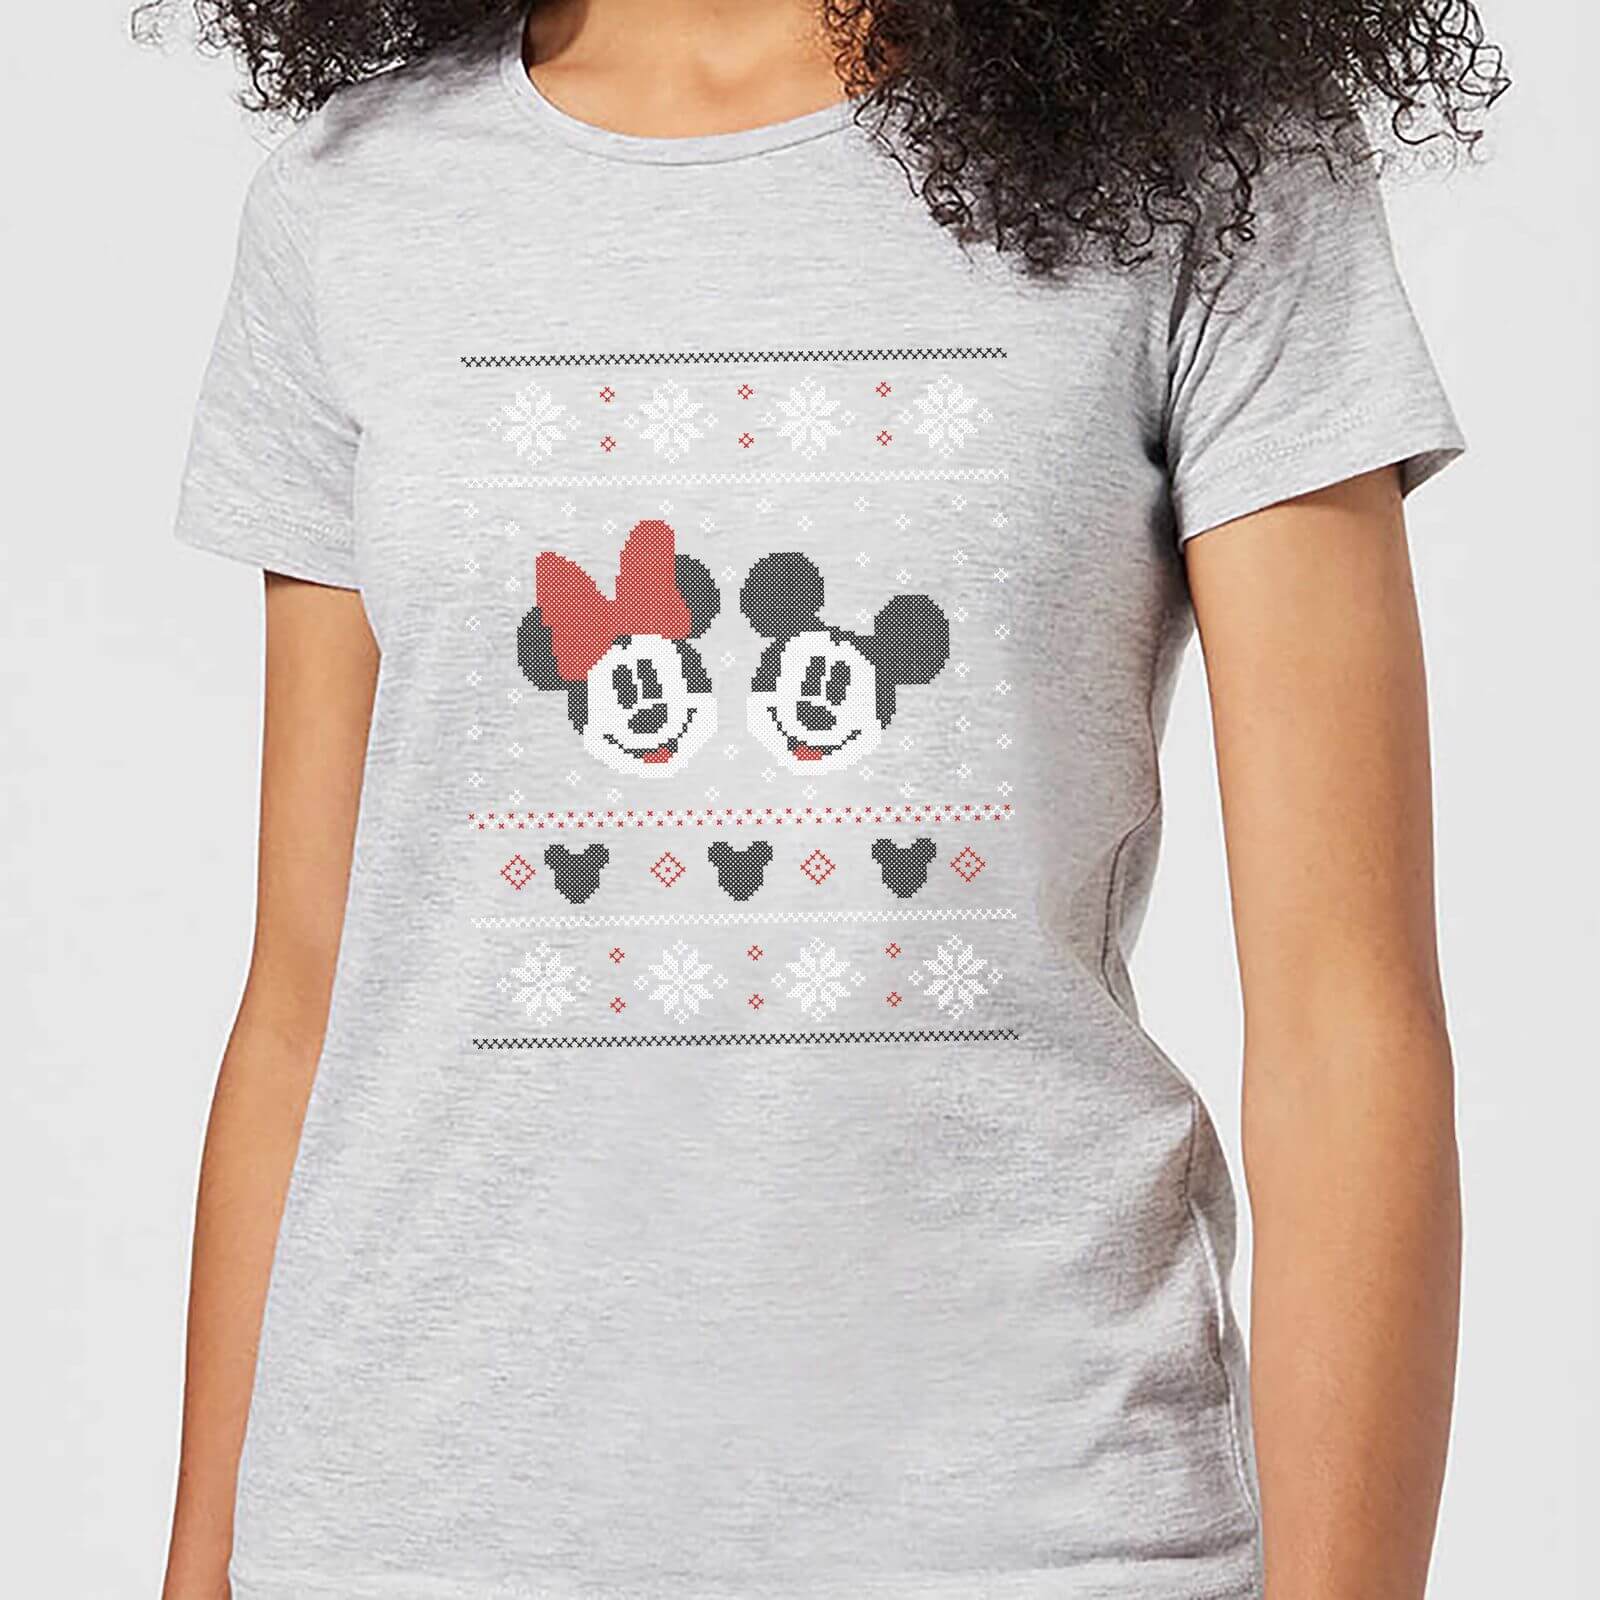 Disney Mickey And Minnie Mouse Christmas Women's Grey T-Shirt - S - Grey